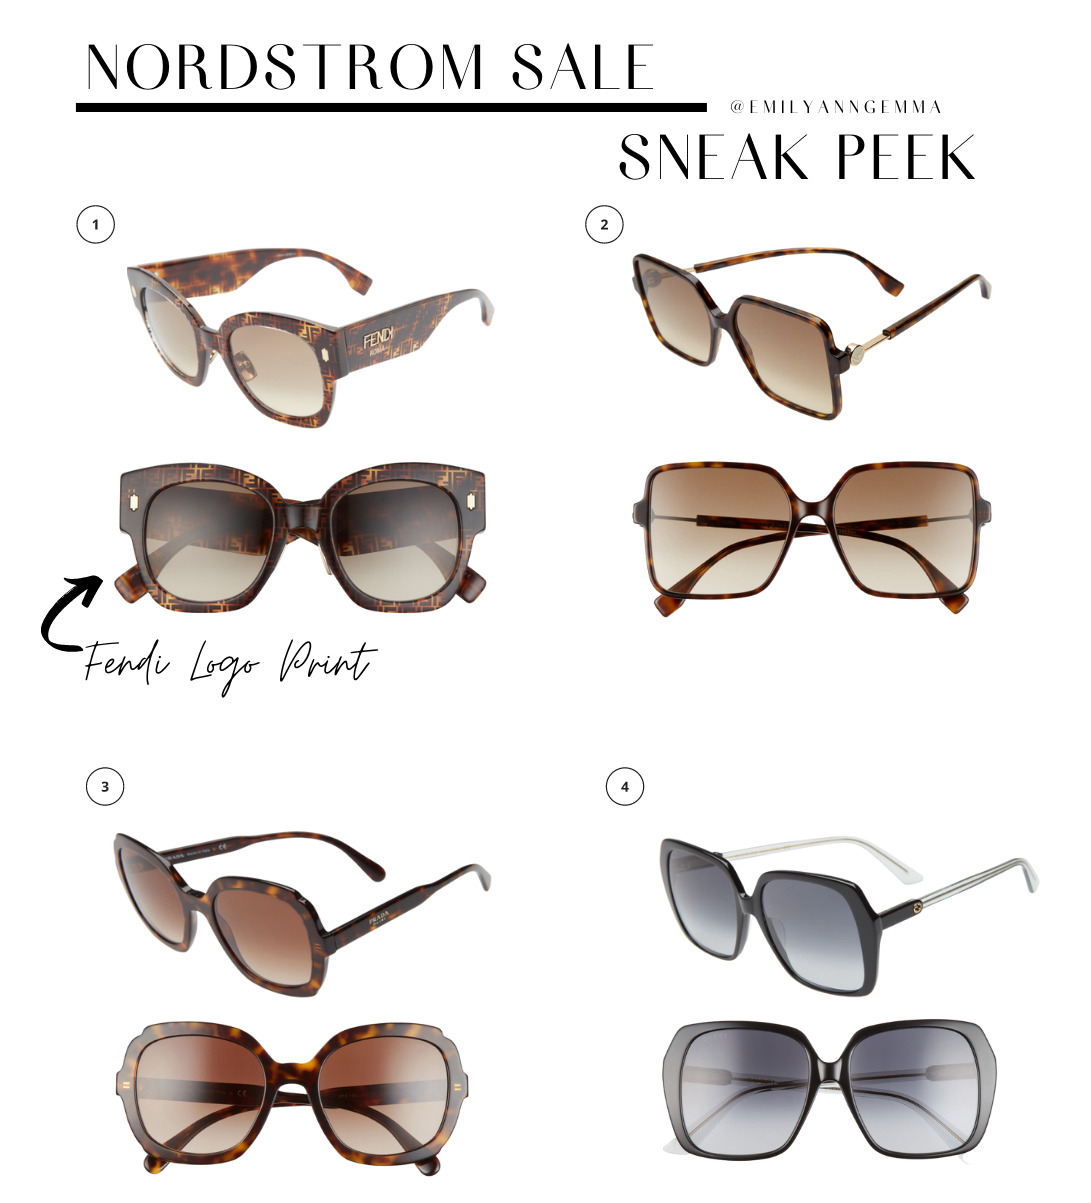 nsale 2021, nordstrom anniversary sale 2021, nSALE sunglasses, must have blog posts nordstrom sale 2020, Emily Ann Gemma, the sweetest thing blog | Nordstrom Anniversary Sale by popular US fashion blog, The Sweetest Thing: image of Nordstrom Sale items. | Nordstrom Anniversary Sale by popular US fashion blog, The Sweetest Thing: collage image of Fendi logo print sunglasses, tortoise shell sunglasses, and square black frame sunglasses. 